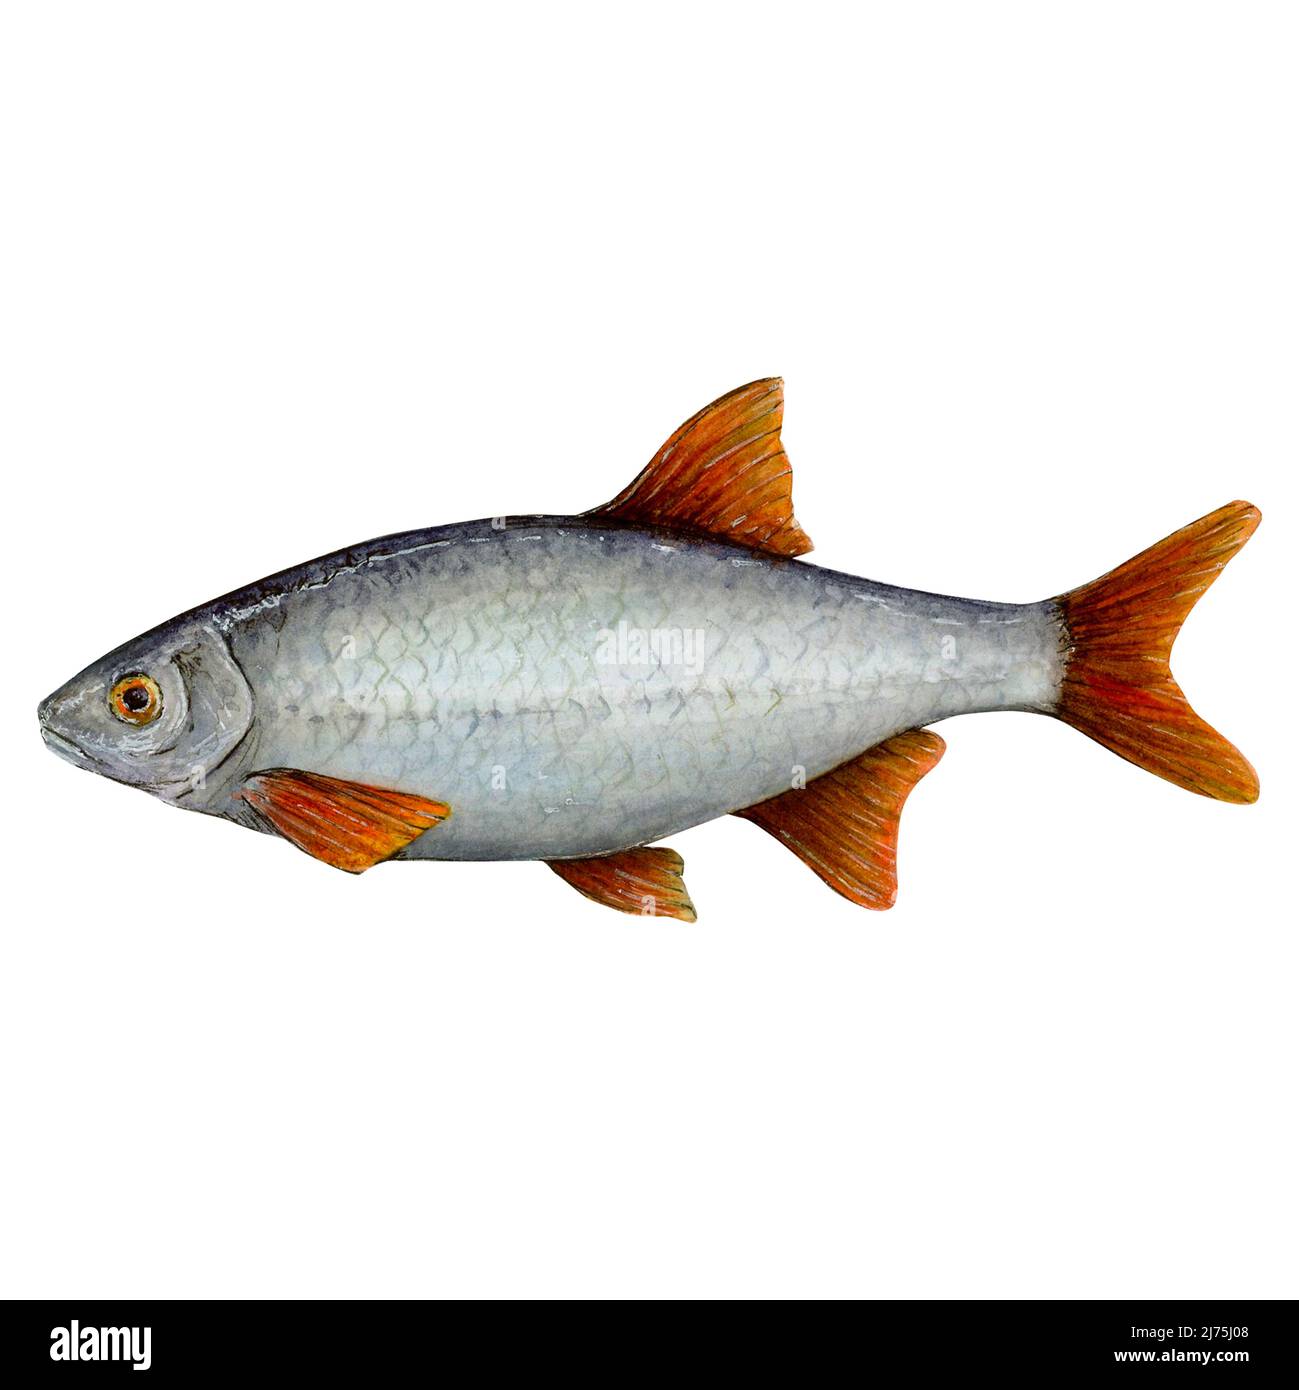 River fish called roach lives in almost all water bodies. Has a silver color with red fins and tail Stock Photo